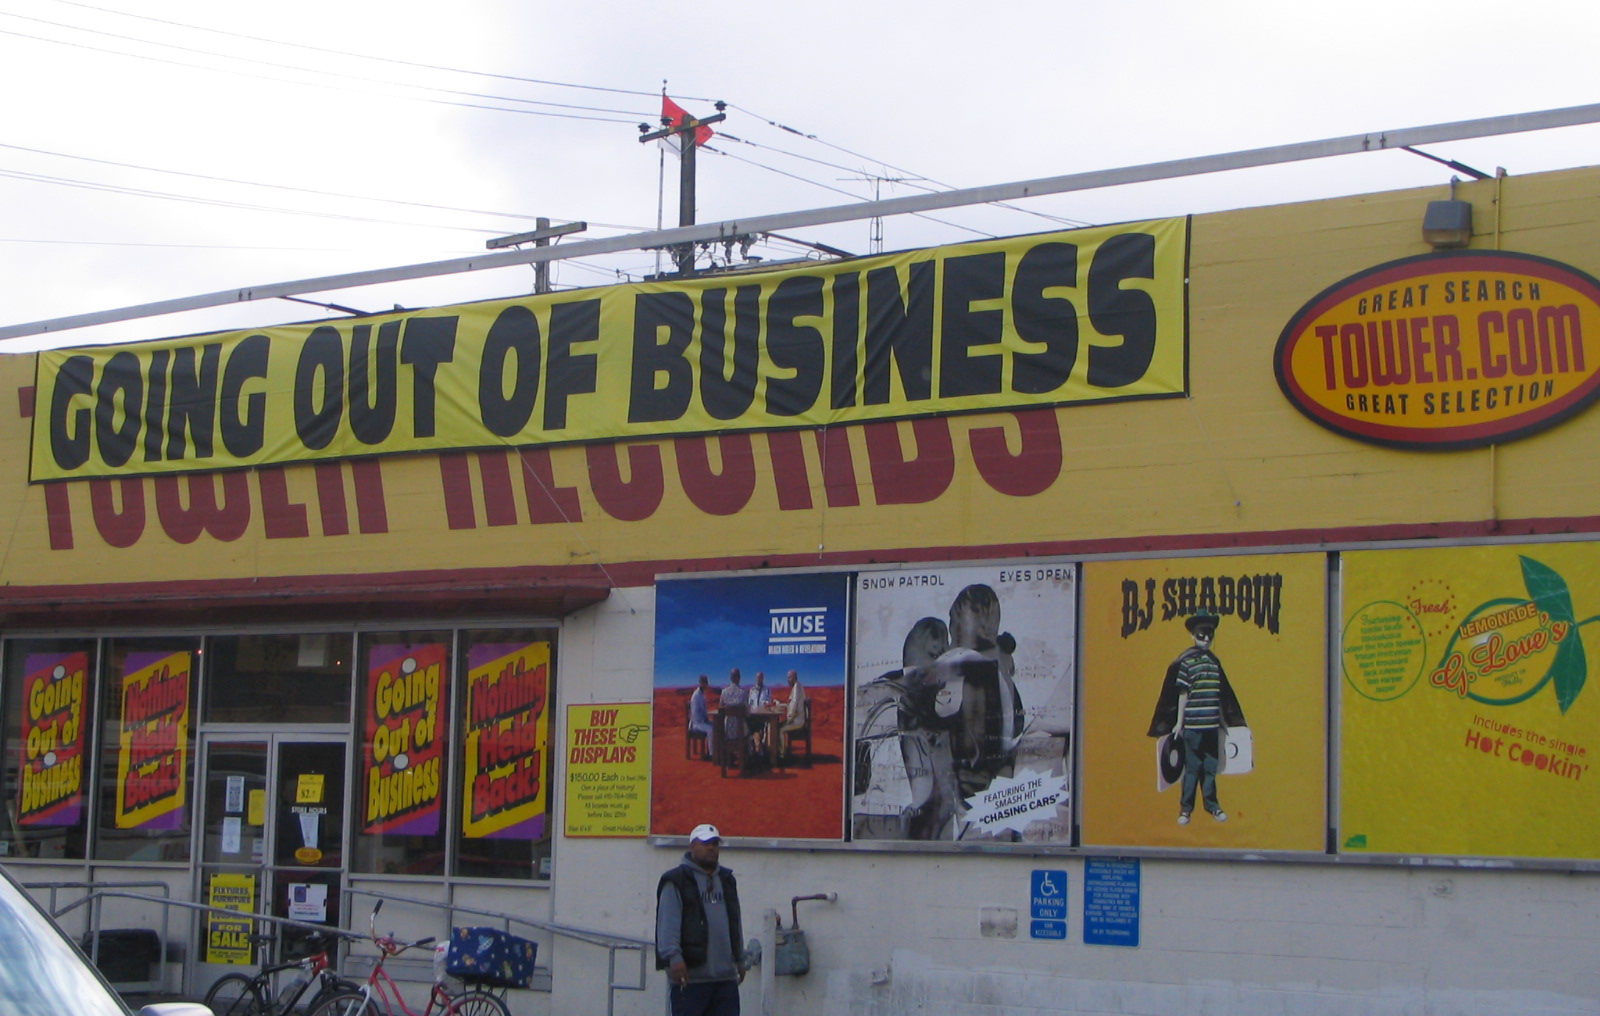 The last days of the San Francisco branch of Tower Records showing the Twoer Records logo on the storefront covered with a 